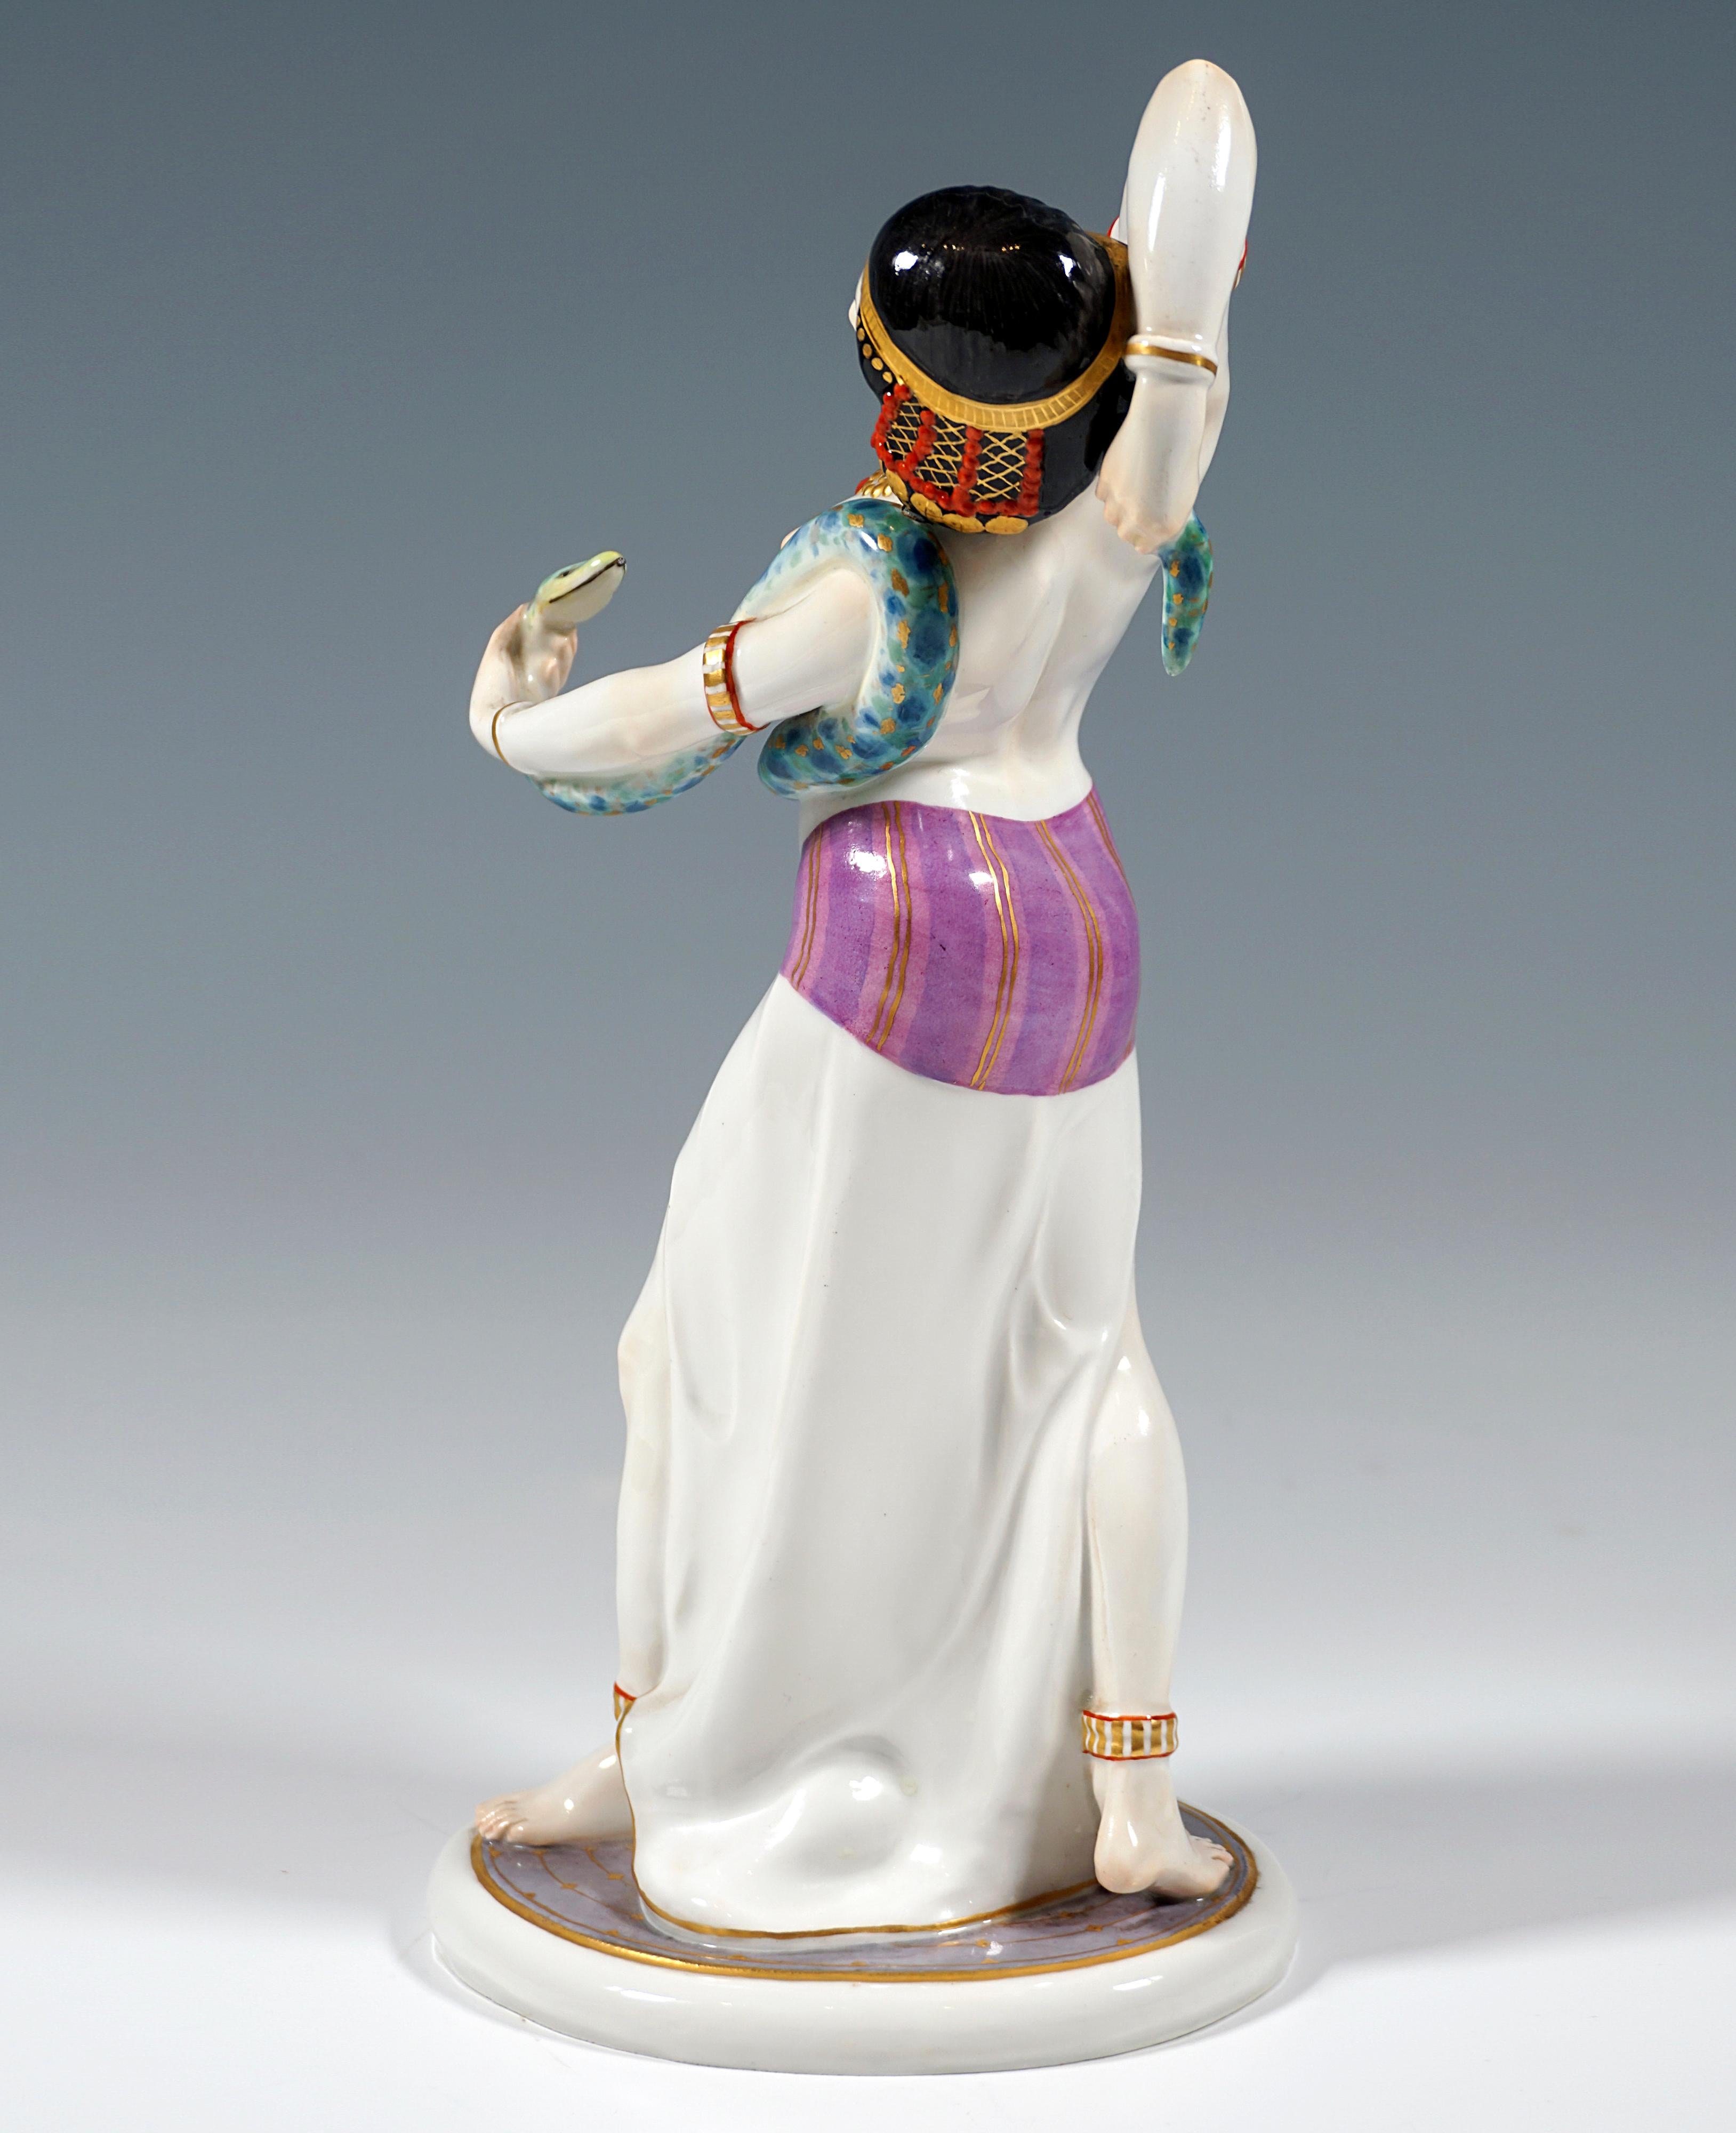 Hand-Crafted Meissen Art Nouveau Figure Of A Snake Dancer By Max Bochmann Circa 1914 For Sale